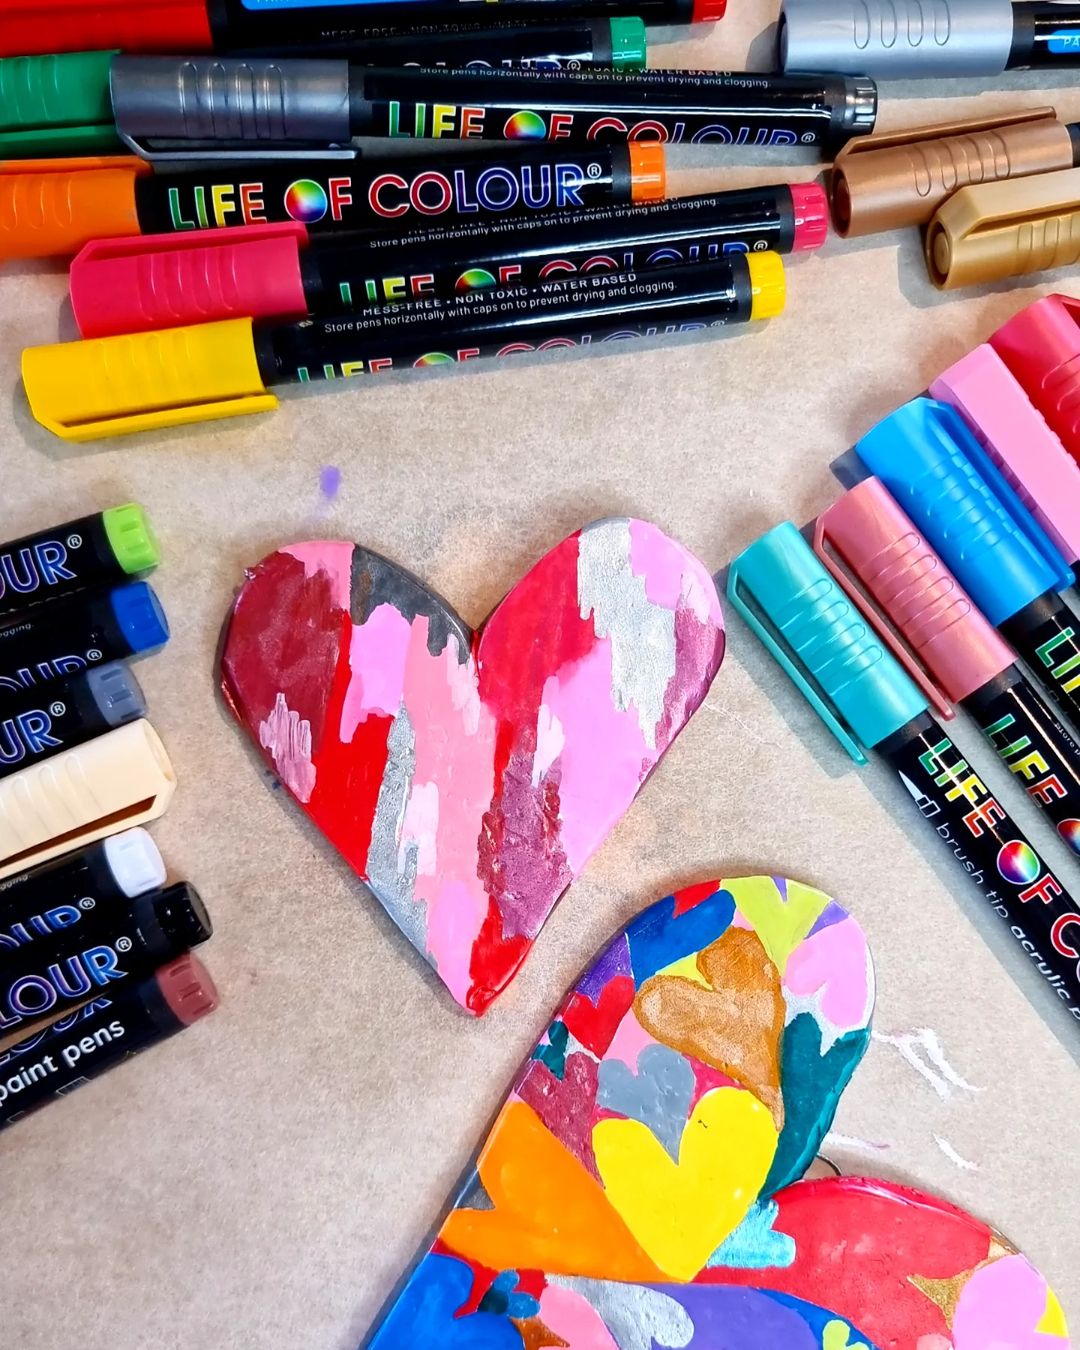 Cute Valentine's Day and Friendship Day craft ideas for all ages